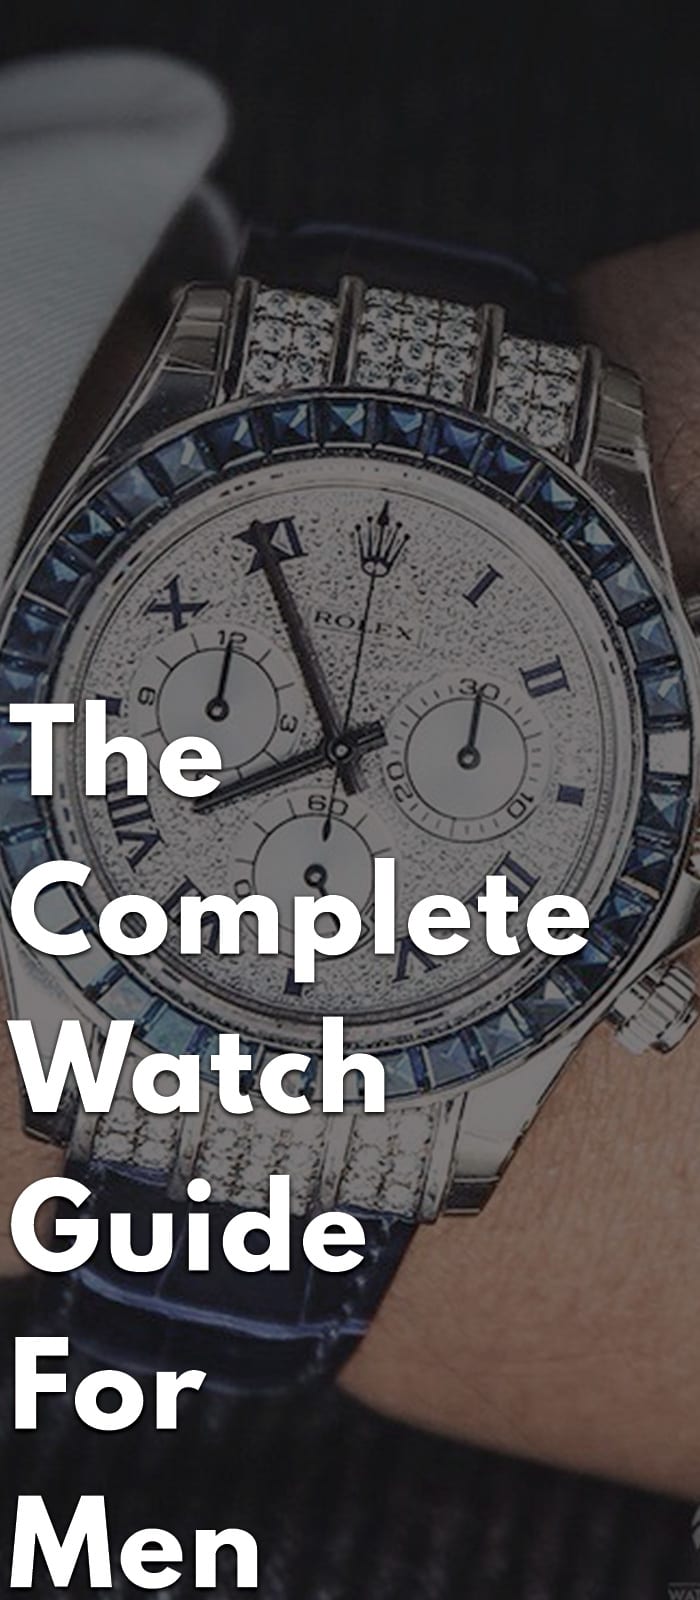 The Complete Watch Guide For Men